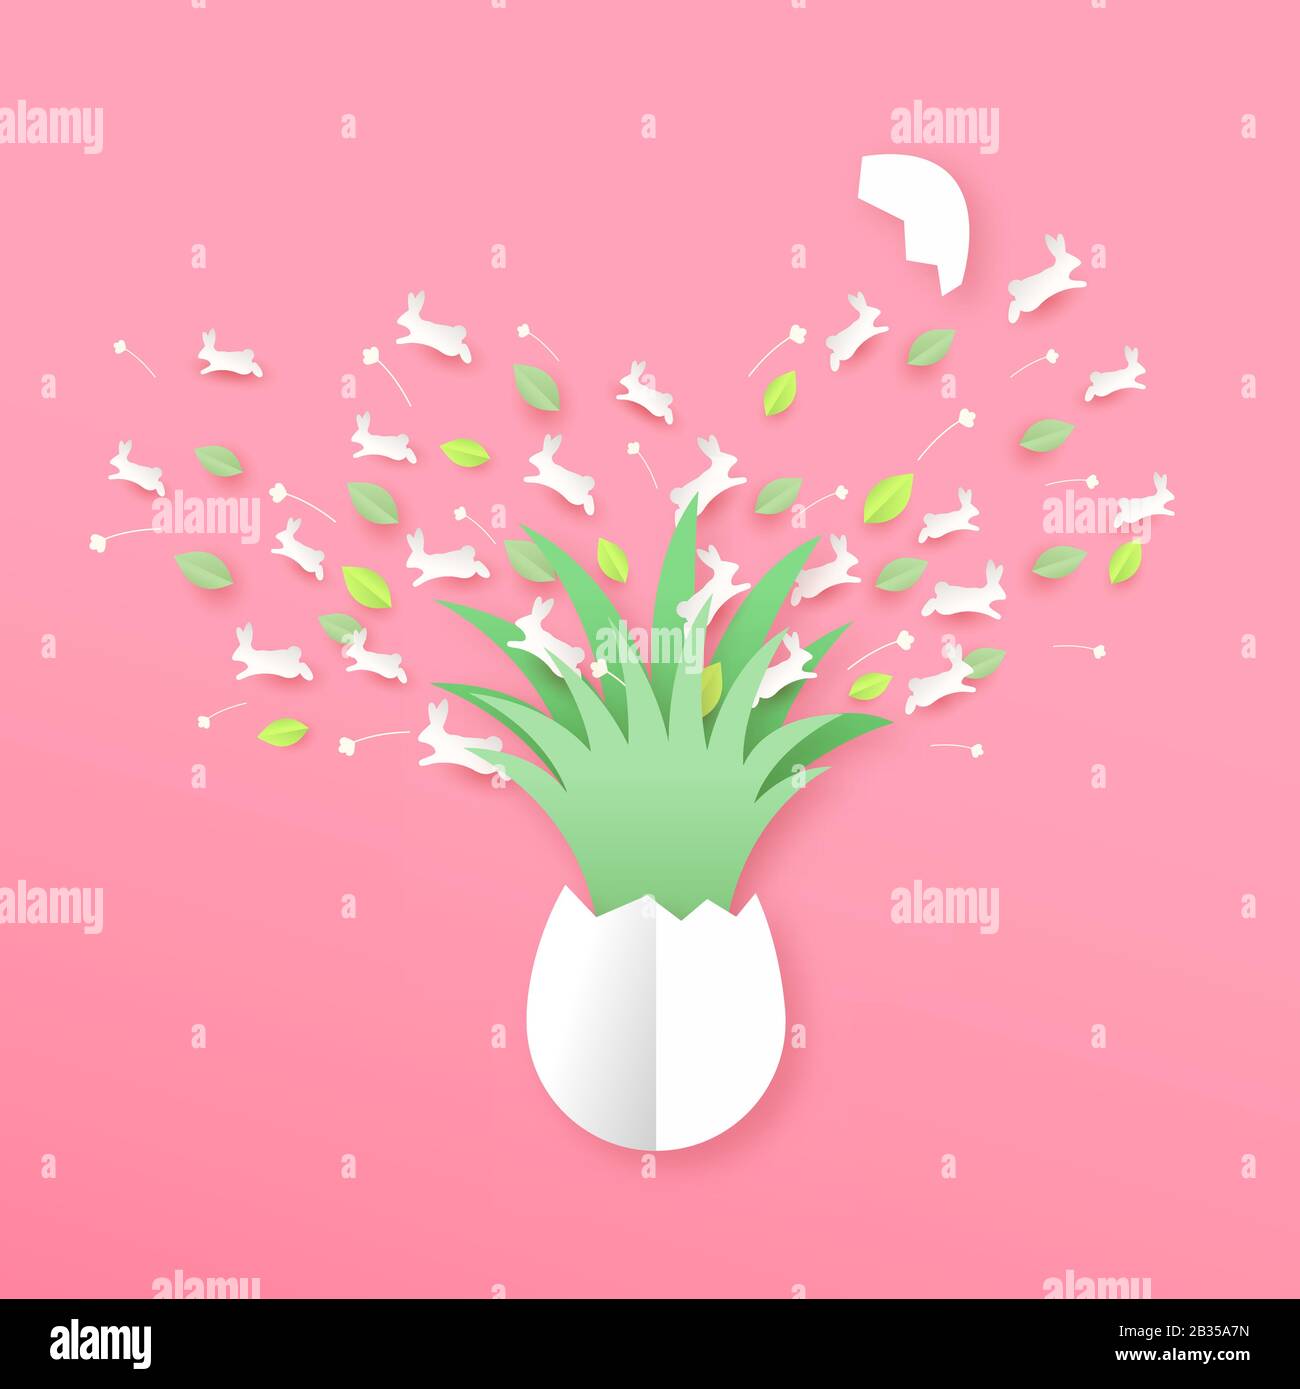 Easter season concept in 3d papercut style. Dynamic open egg with funny paper craft rabbit animals jumping and spring cutout decoration on isolated ba Stock Vector